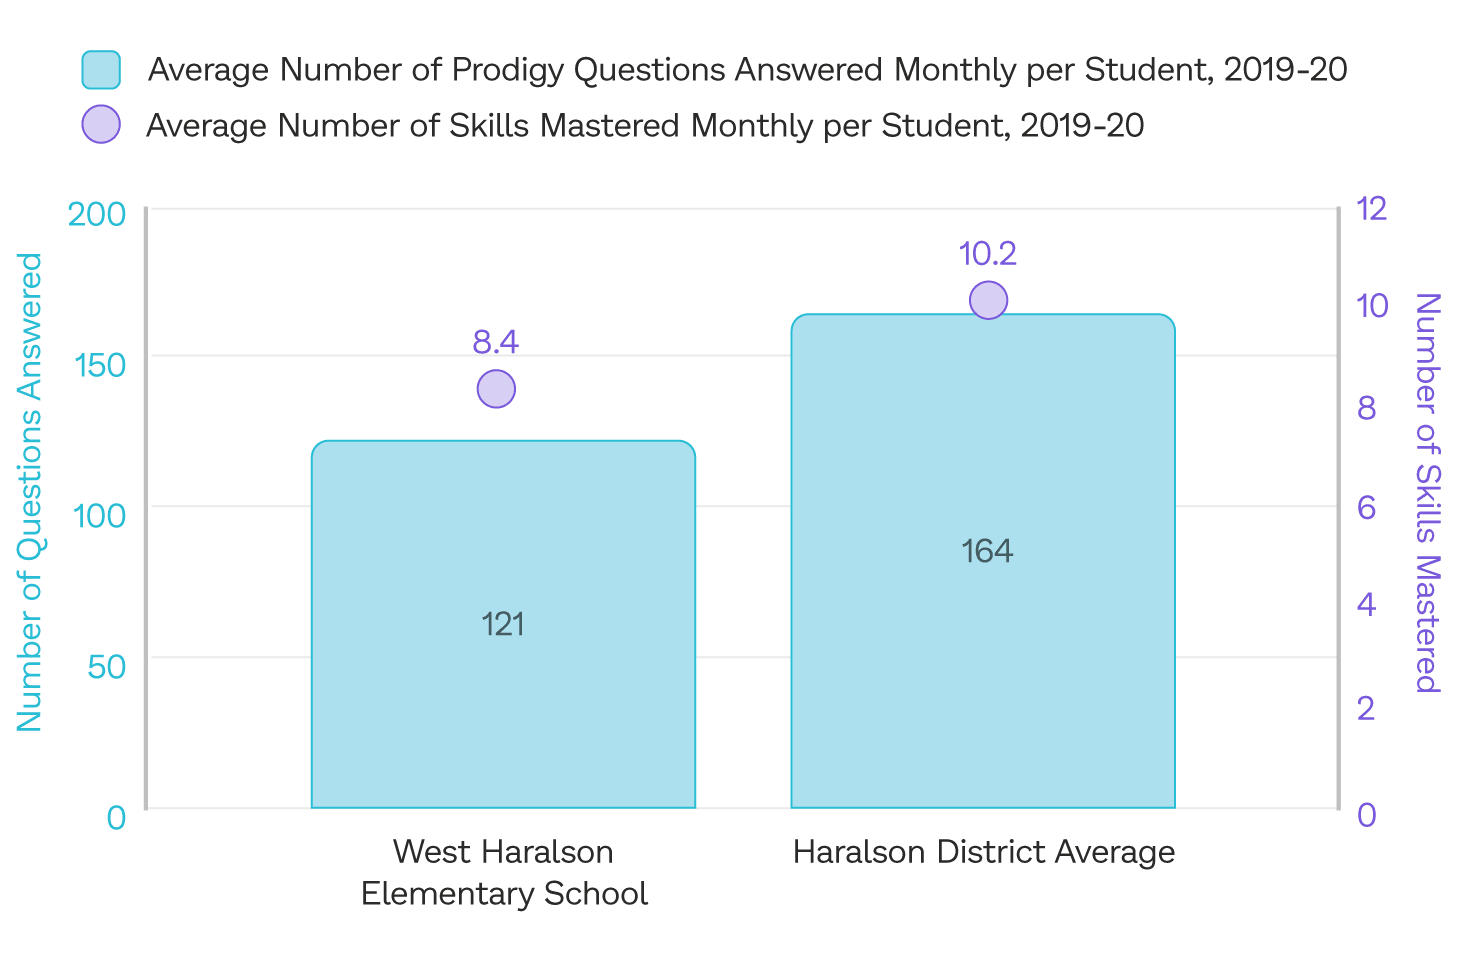 The average number of questions answered and math skills mastered by students in Haralson County School District who play Prodigy, compared to West Haralson Elementary in the 2019 to 2020 school year.